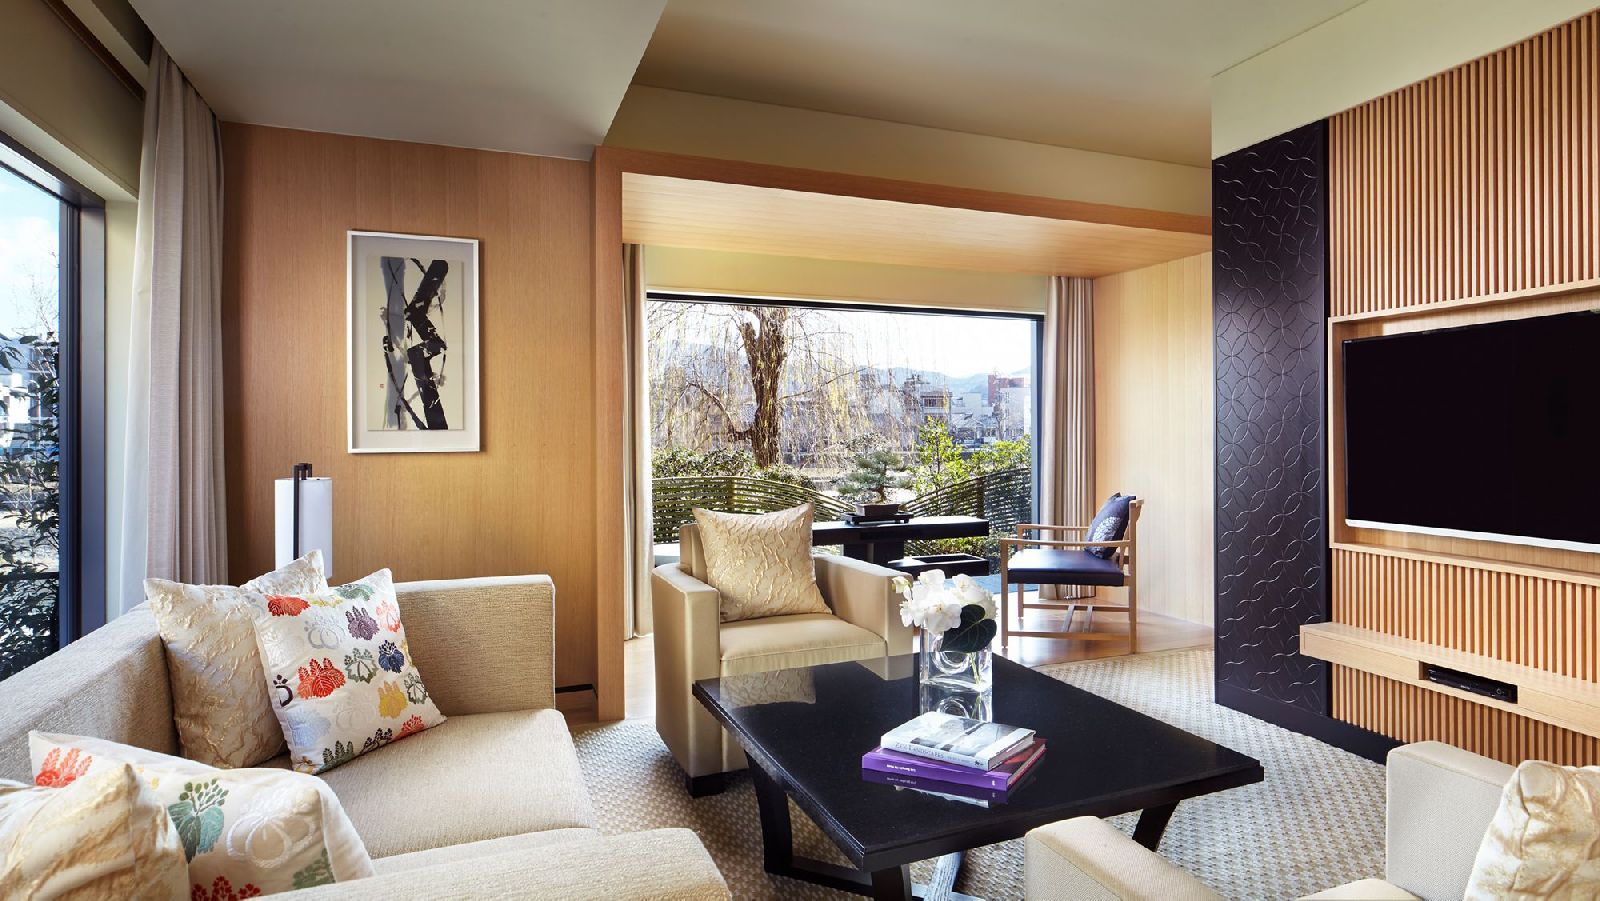 A corner suite at the Ritz Carlton Kyoto in Japan